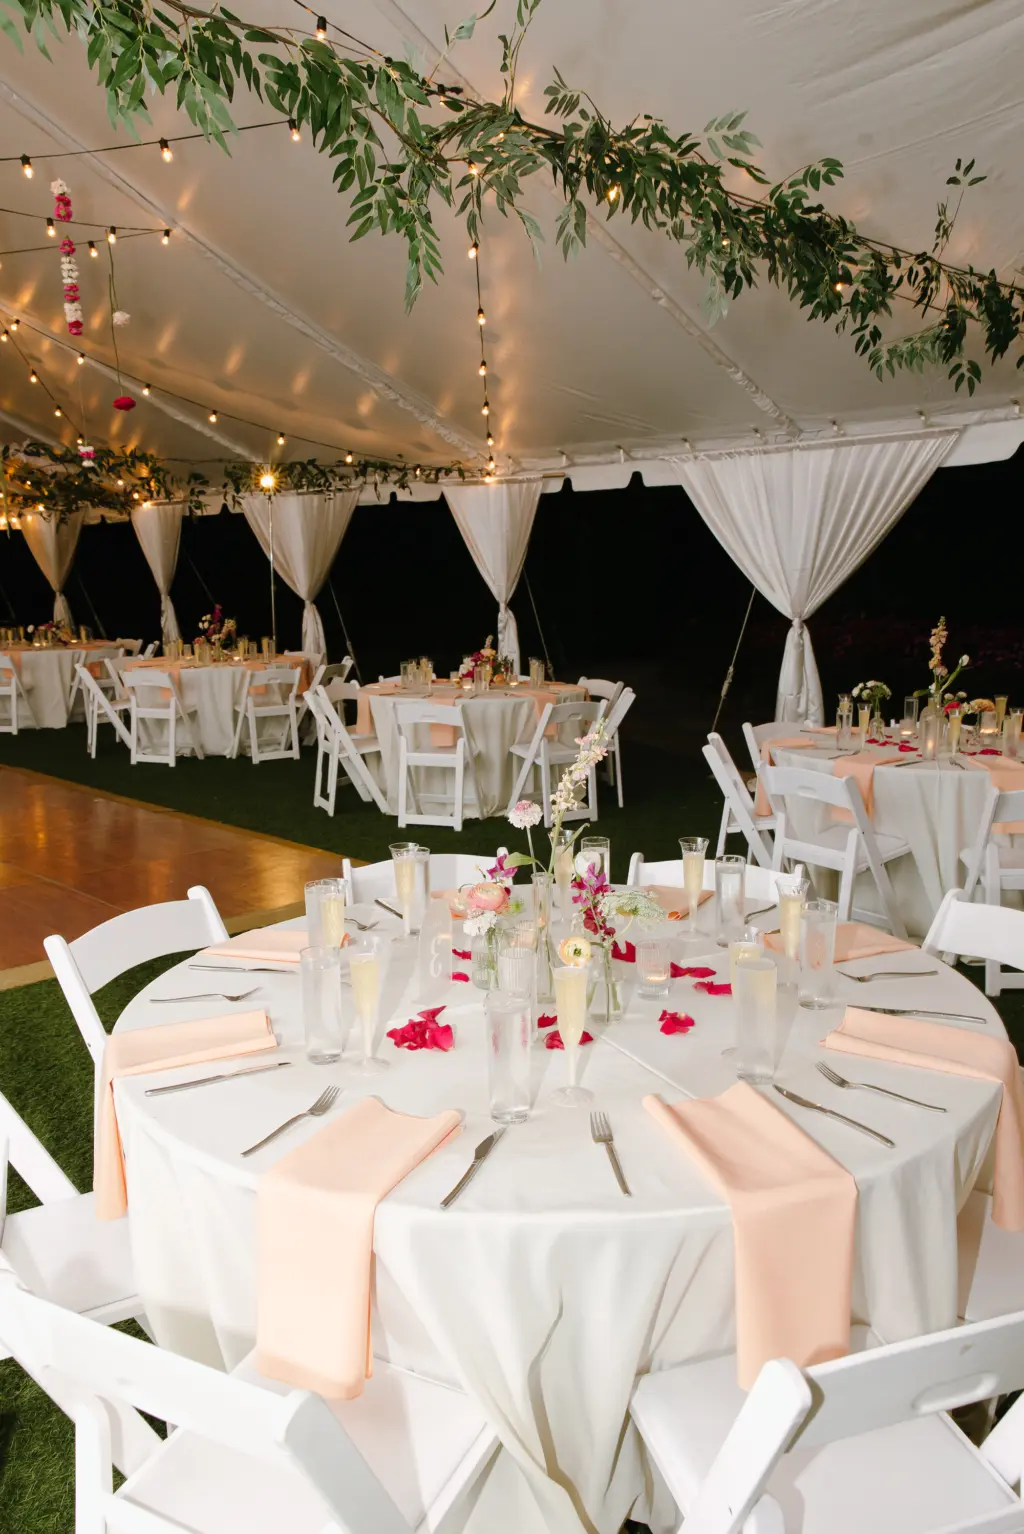 White and Pink Tented Garden Wedding Reception Decor Inspiration | Wildflowers in Bud Vases Centerpiece Ideas | Round Tables and Folding Garden Chairs